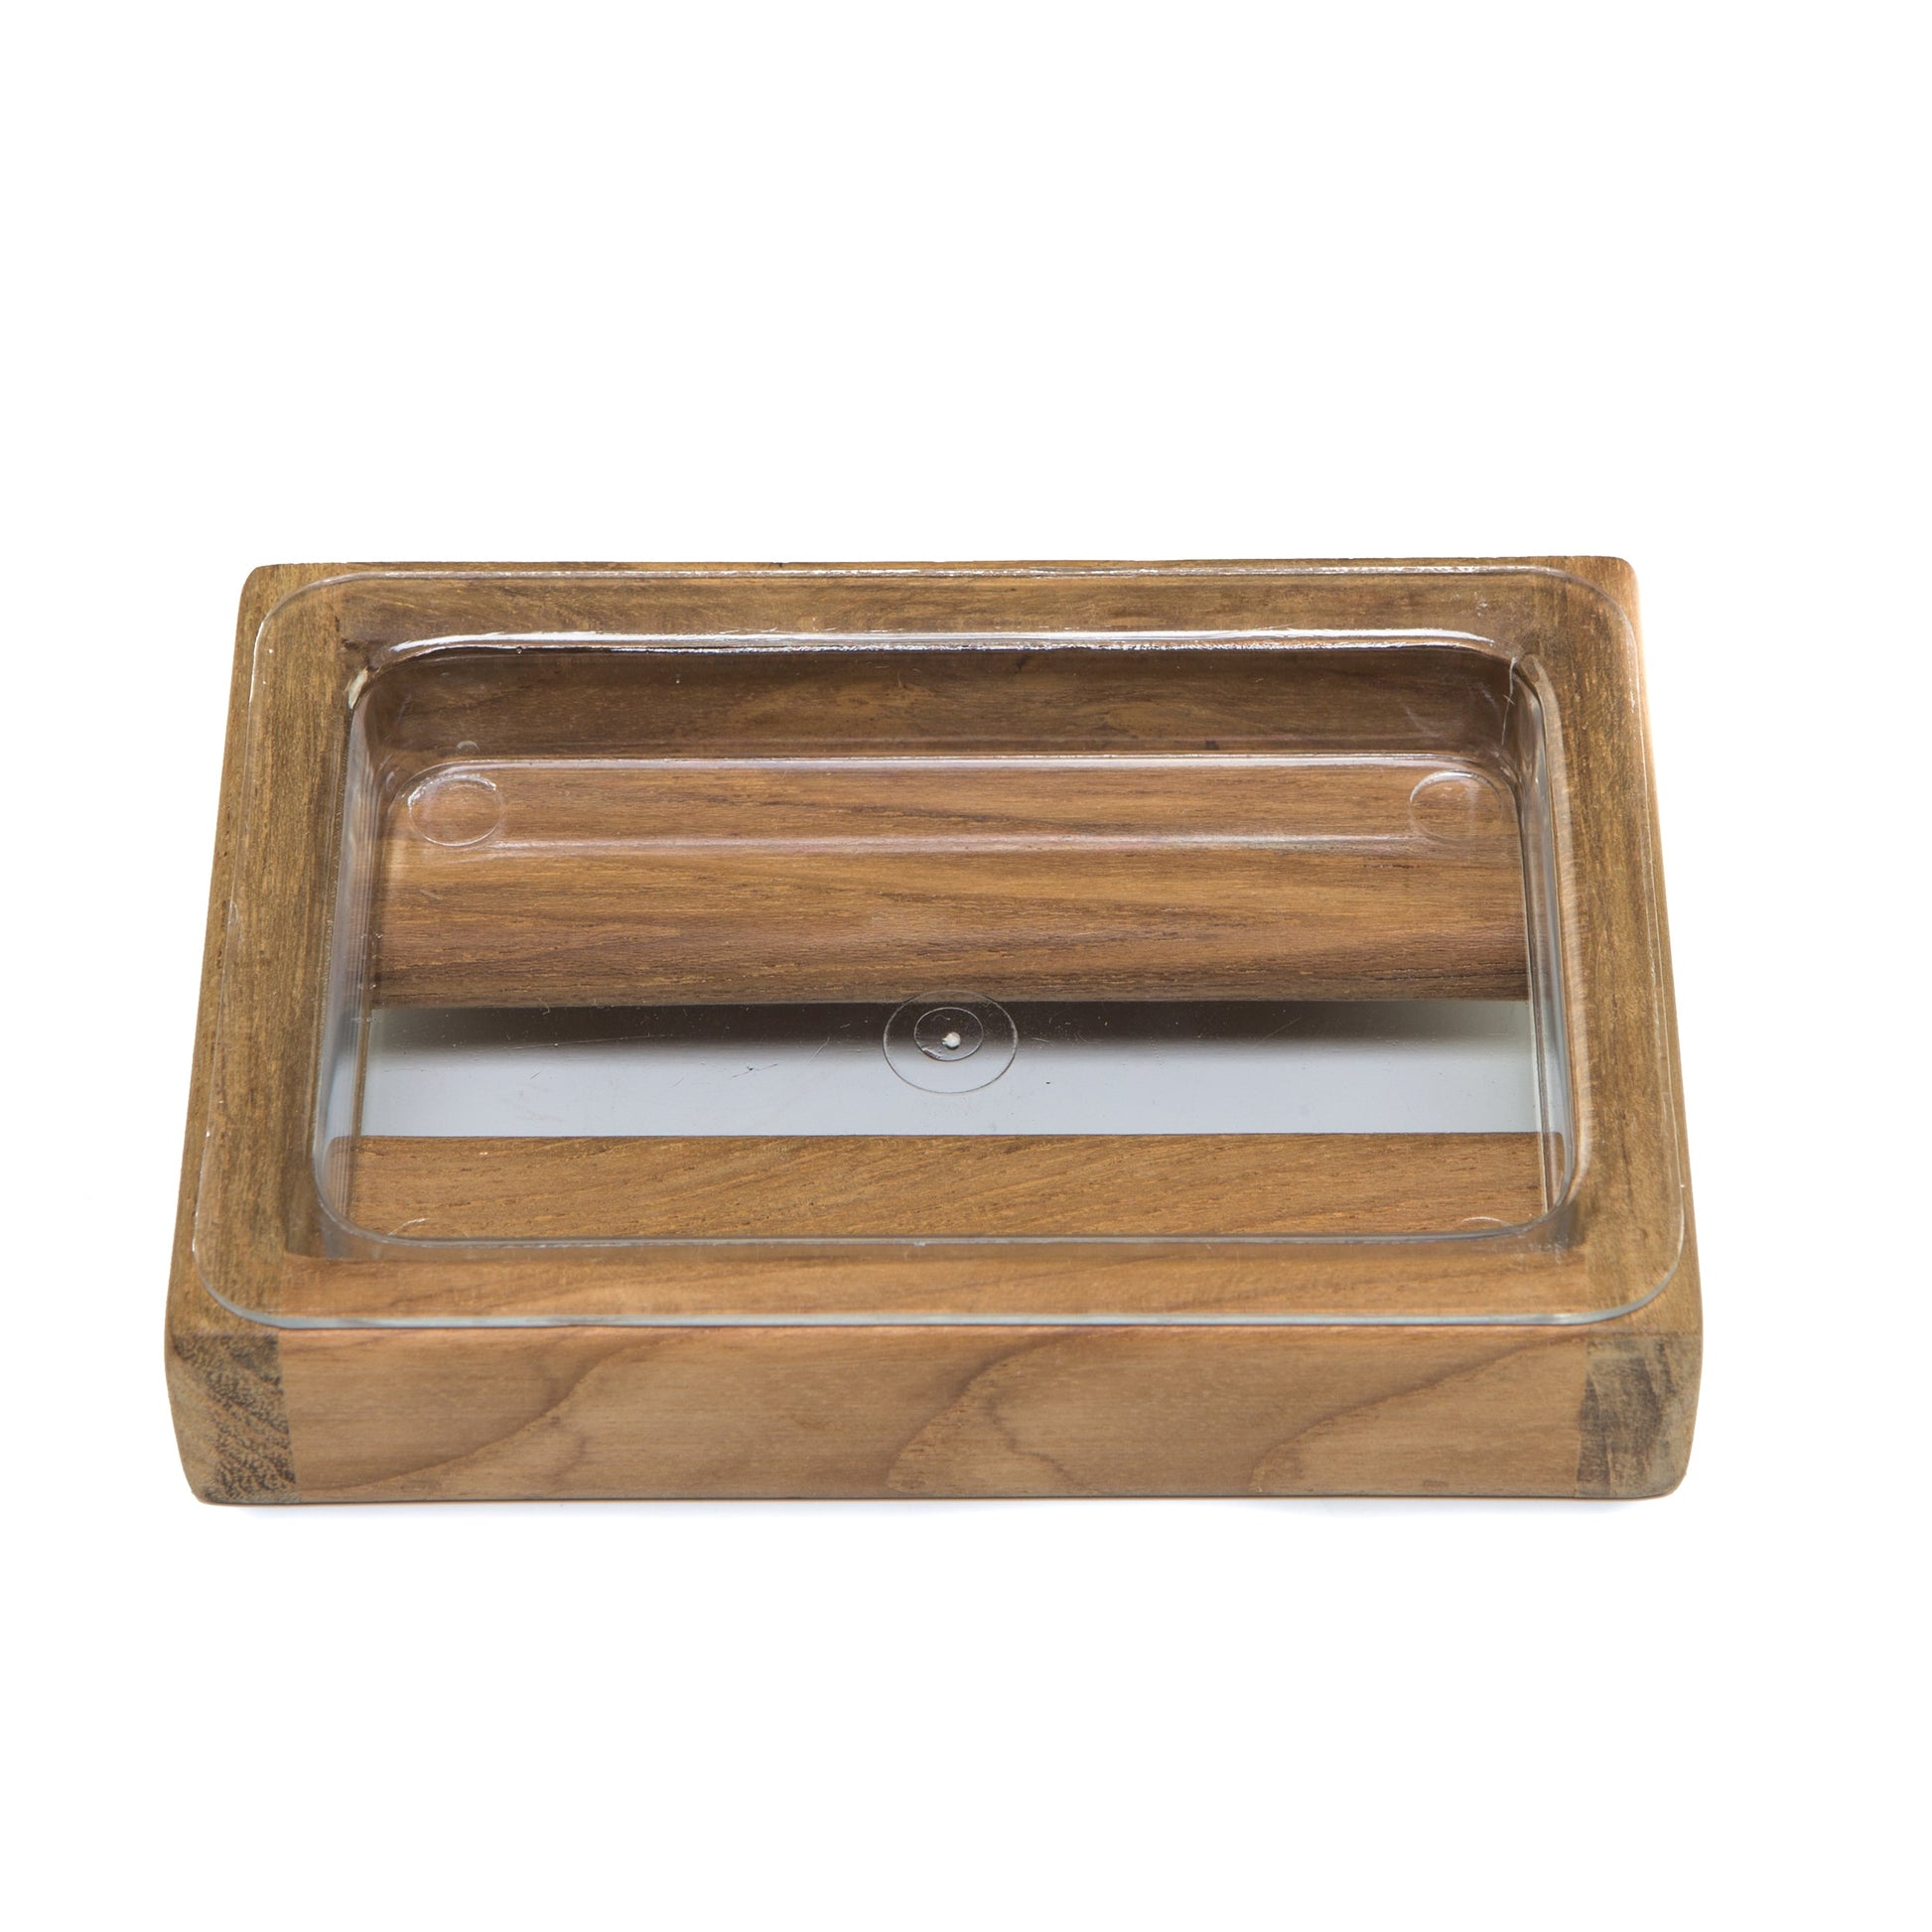 Teak Soap Dish-Bathroom Accessories-Nautical Decor and Gifts